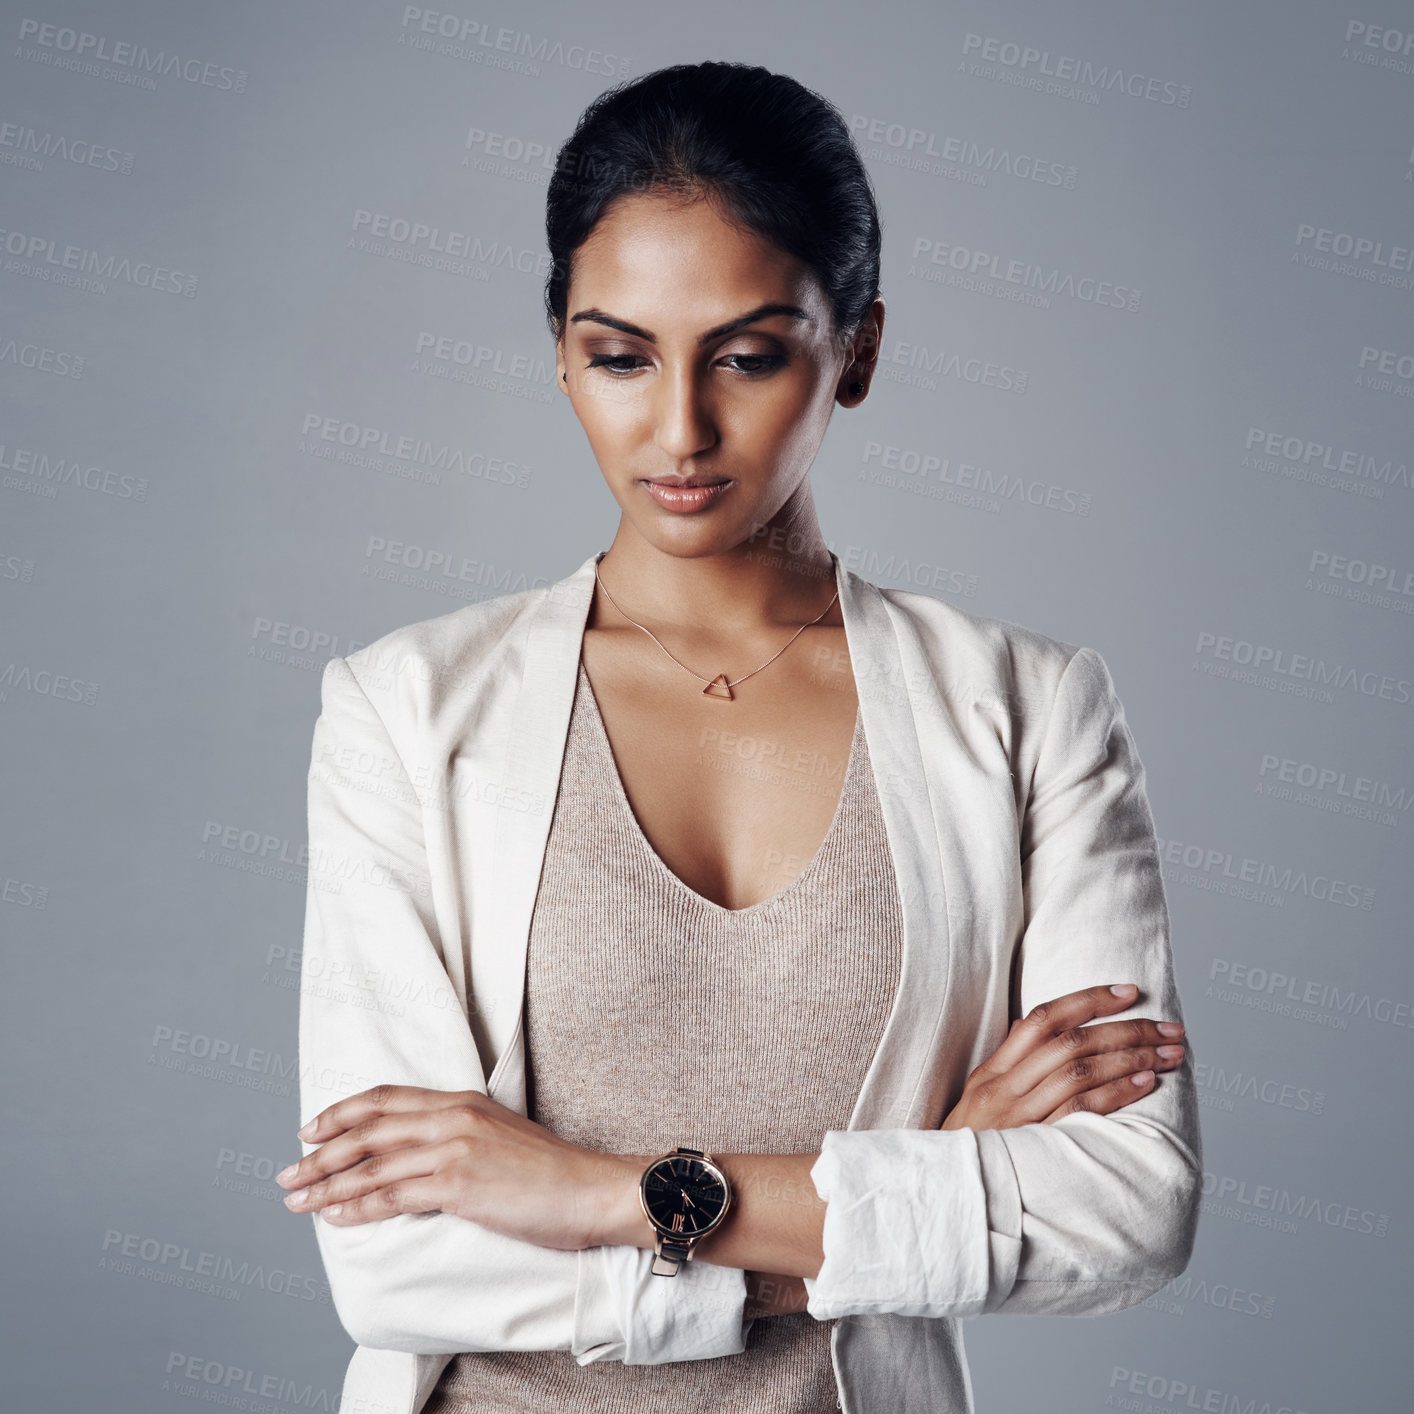 Buy stock photo Studio shot of a young businesswoman looking pensive against a gray background